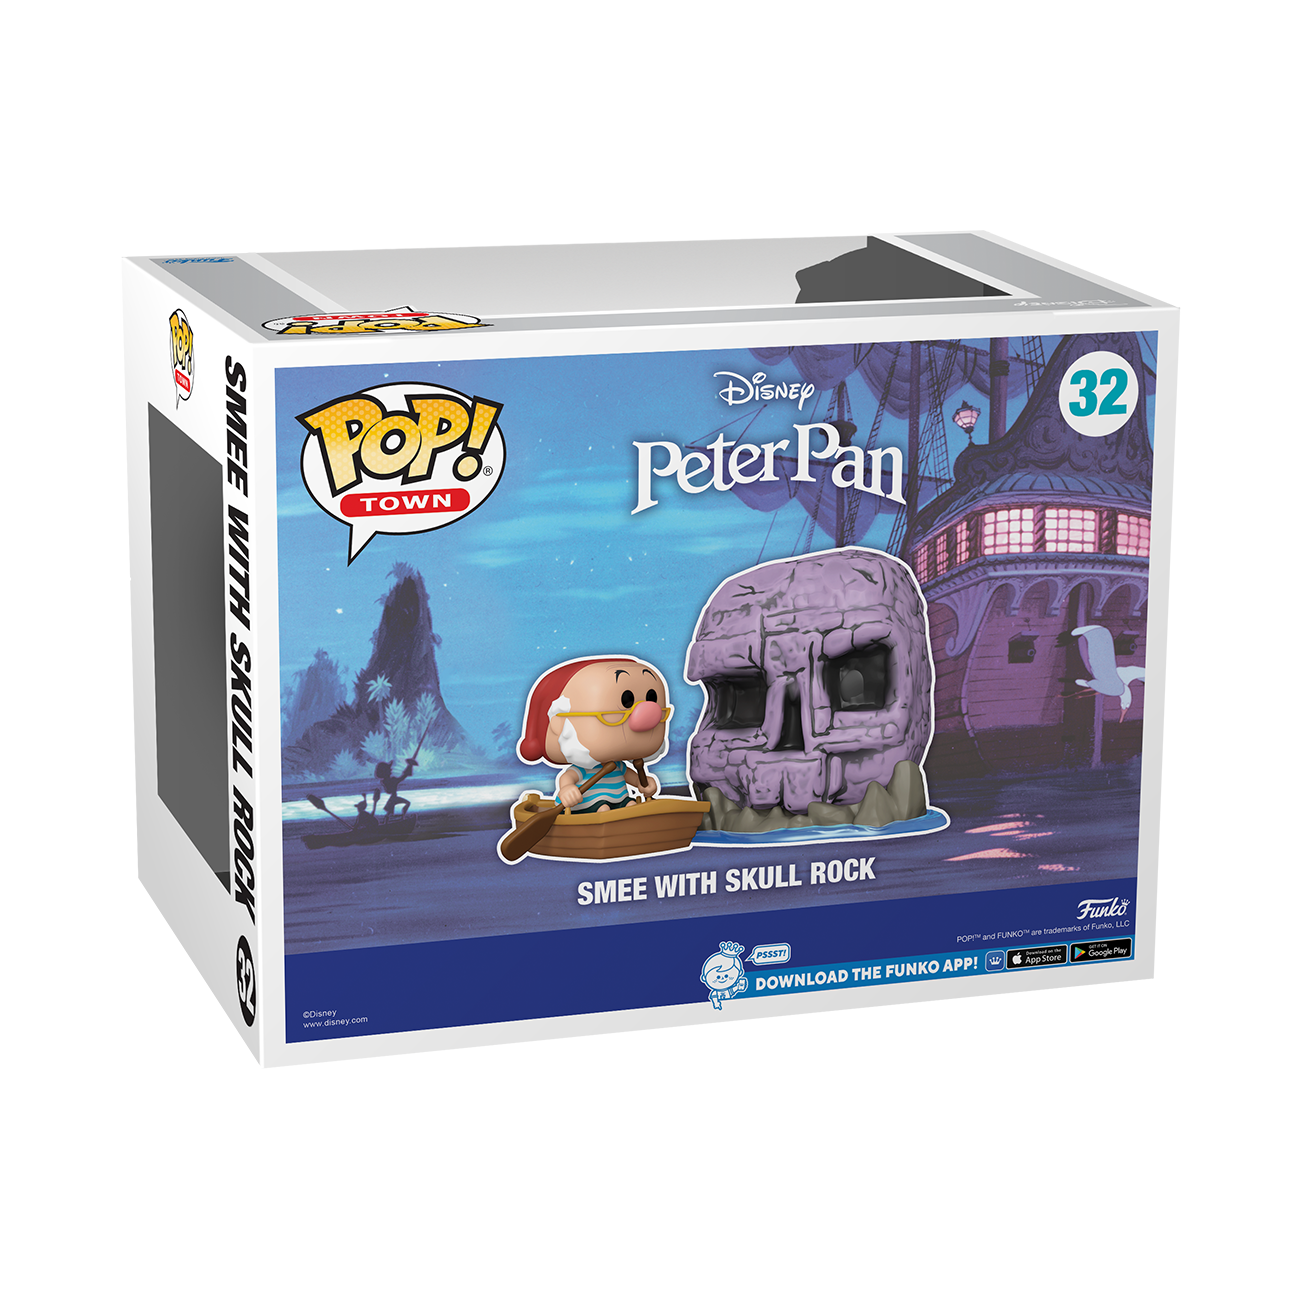 Peter Pan - Smee with Skull Rock NYCC 2022 Fall Convention Exclusive Pop! Town